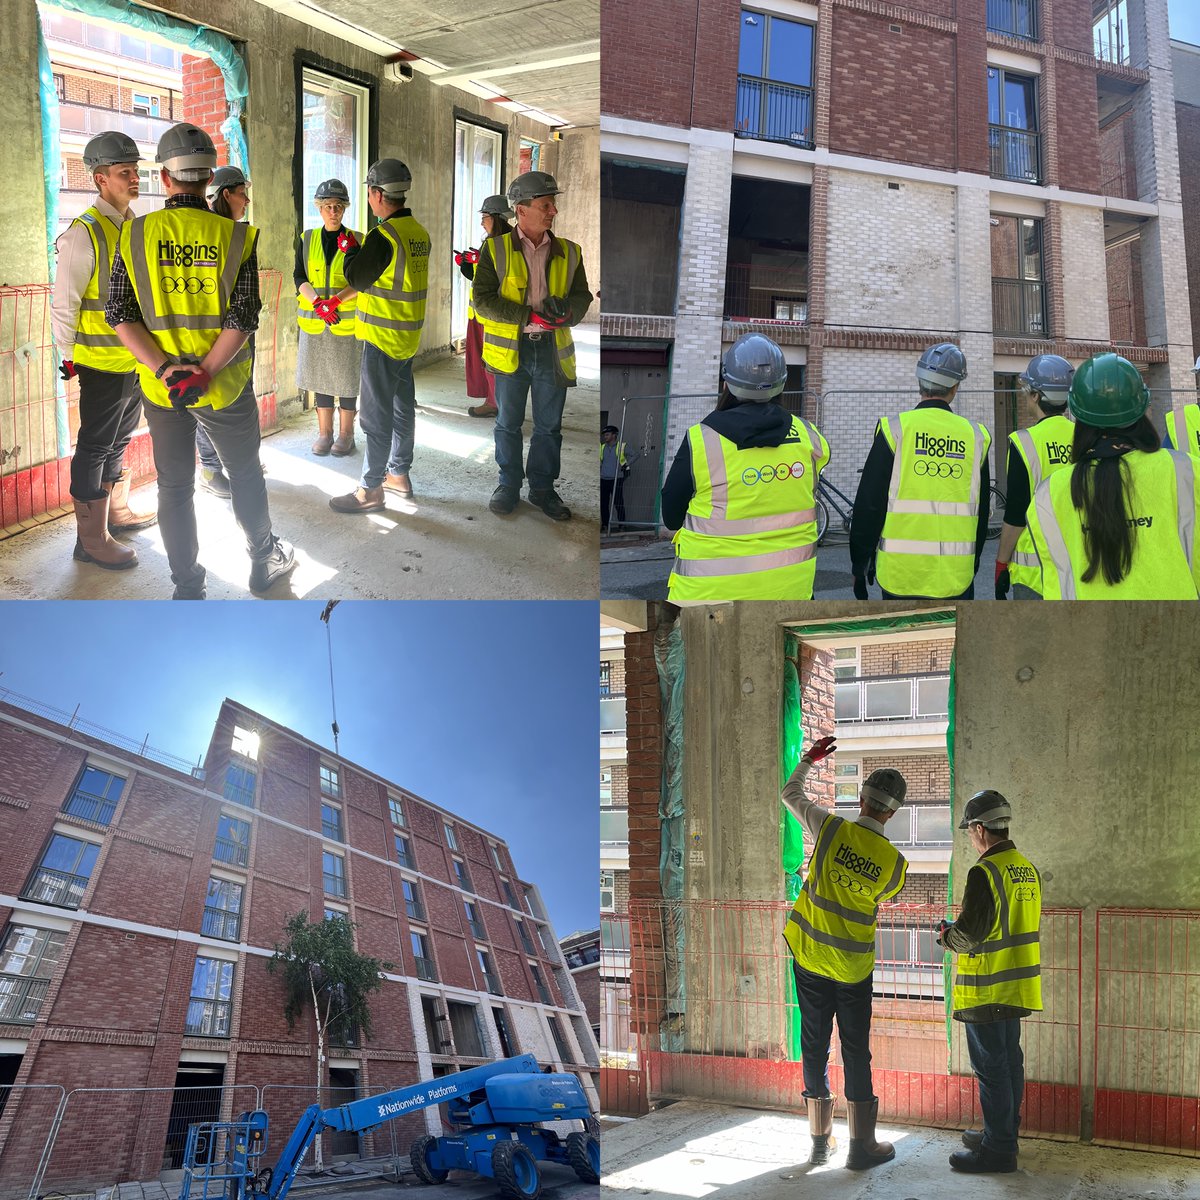 It was a pleasure to welcome the @MayorofHackney, Caroline Woodley to our Wimbourne Street development yesterday to show her the progress being made to deliver 59 mixed tenure apartments.
@hackneycouncil 

#mmc #modular #ukhousing #affordablehousing #newhomes #Hackney #developer